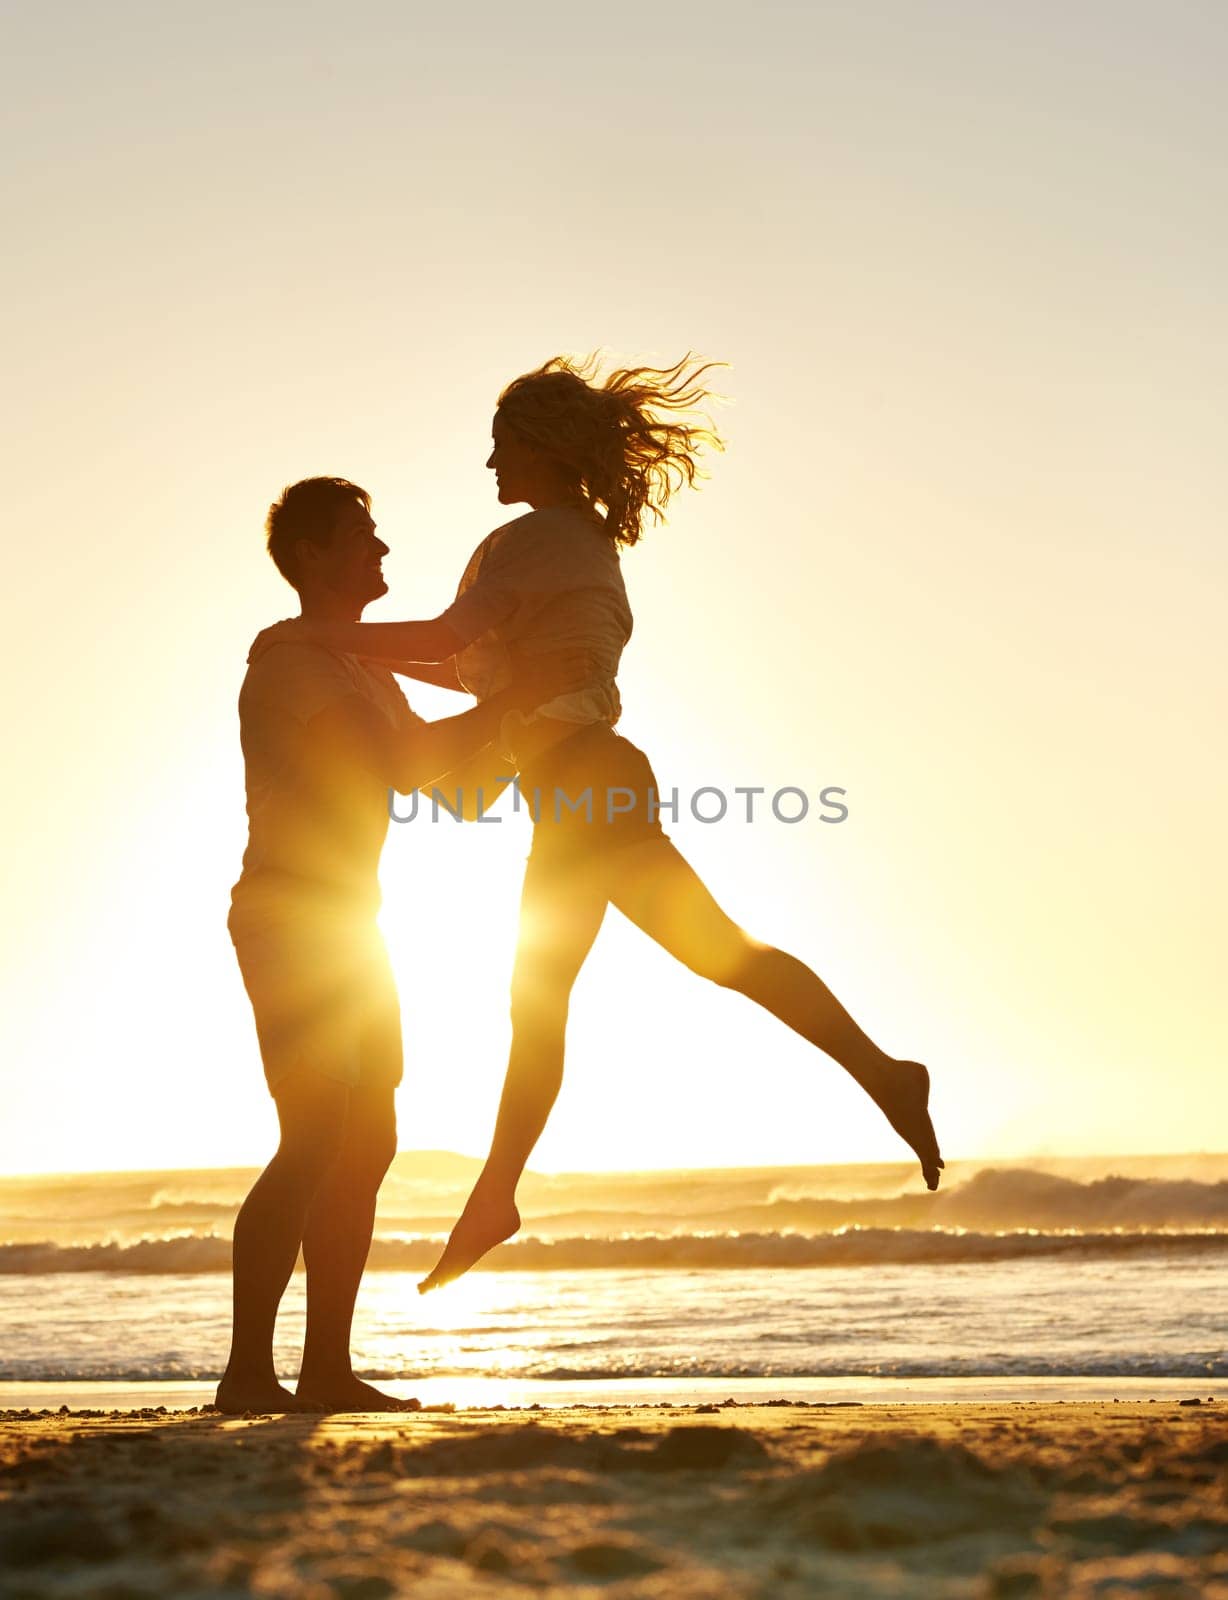 Lifting, sunset and couple with love at beach, ocean or sea for affection, bonding or for fun with soulmate. People, sunrise and romance for care together on vacation, holiday and travel in Australia.